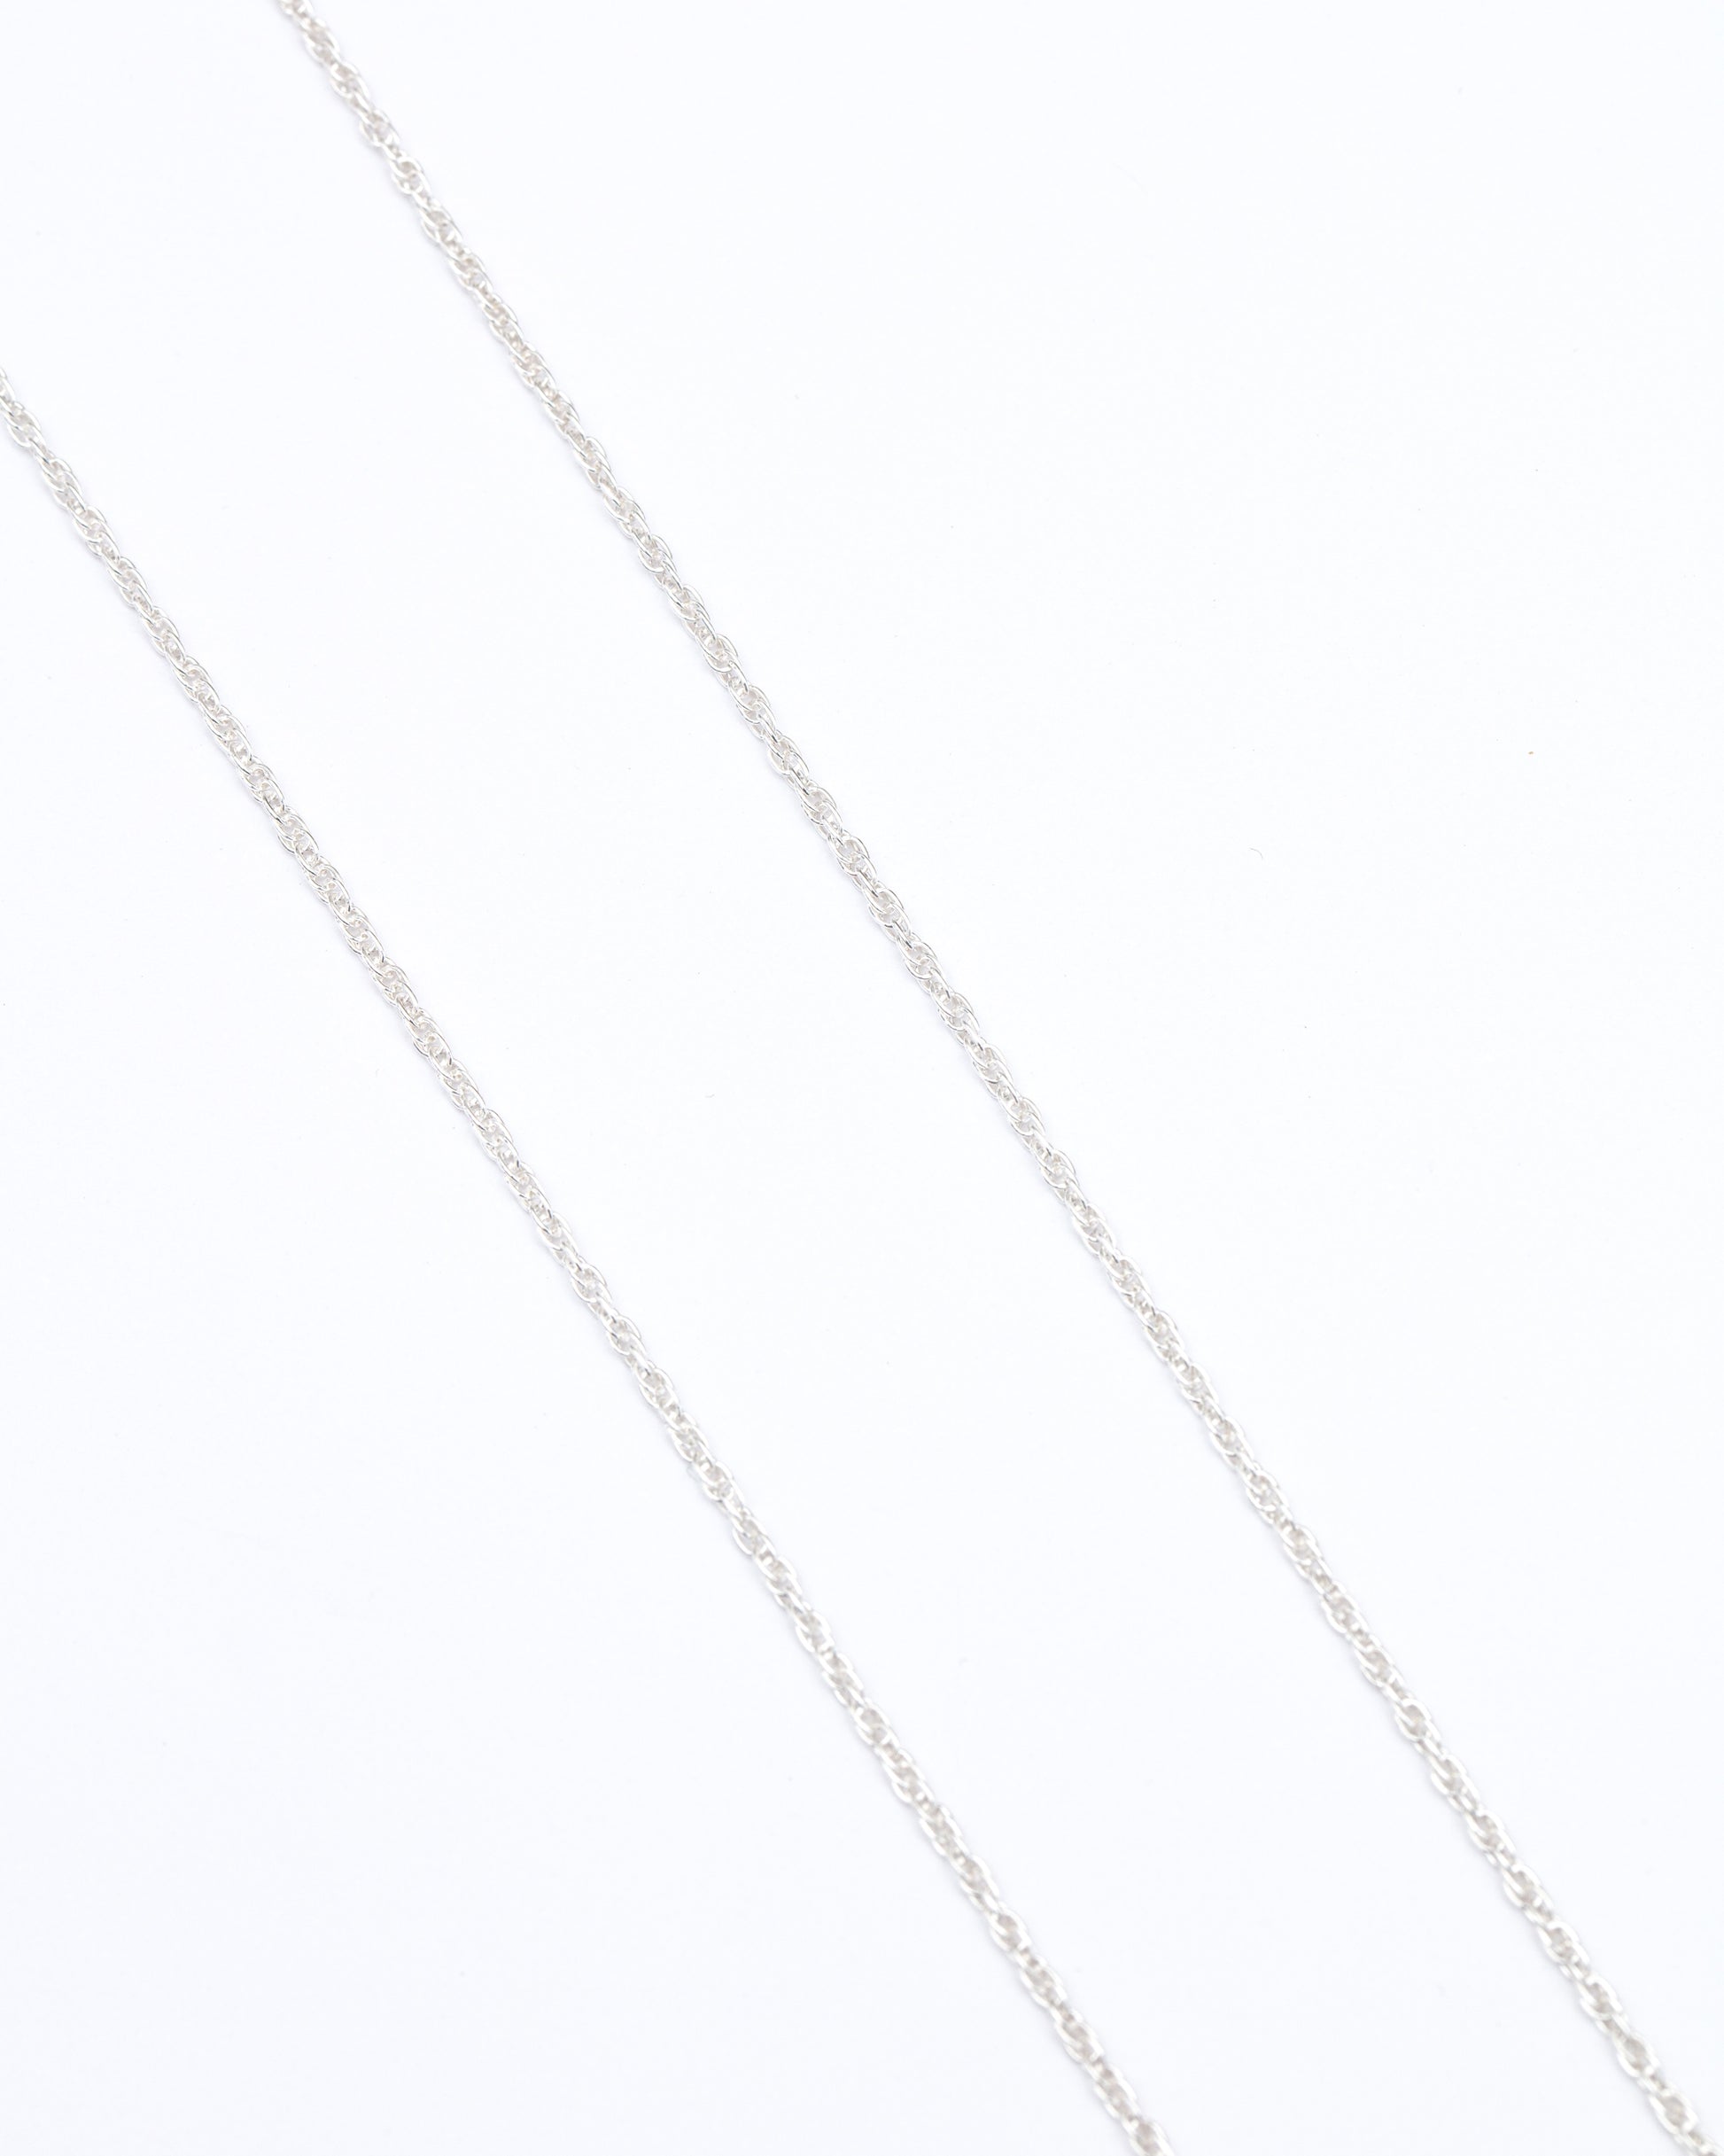 Recycled Silver Rope Chain Necklace | Inspiration Her Jewellery